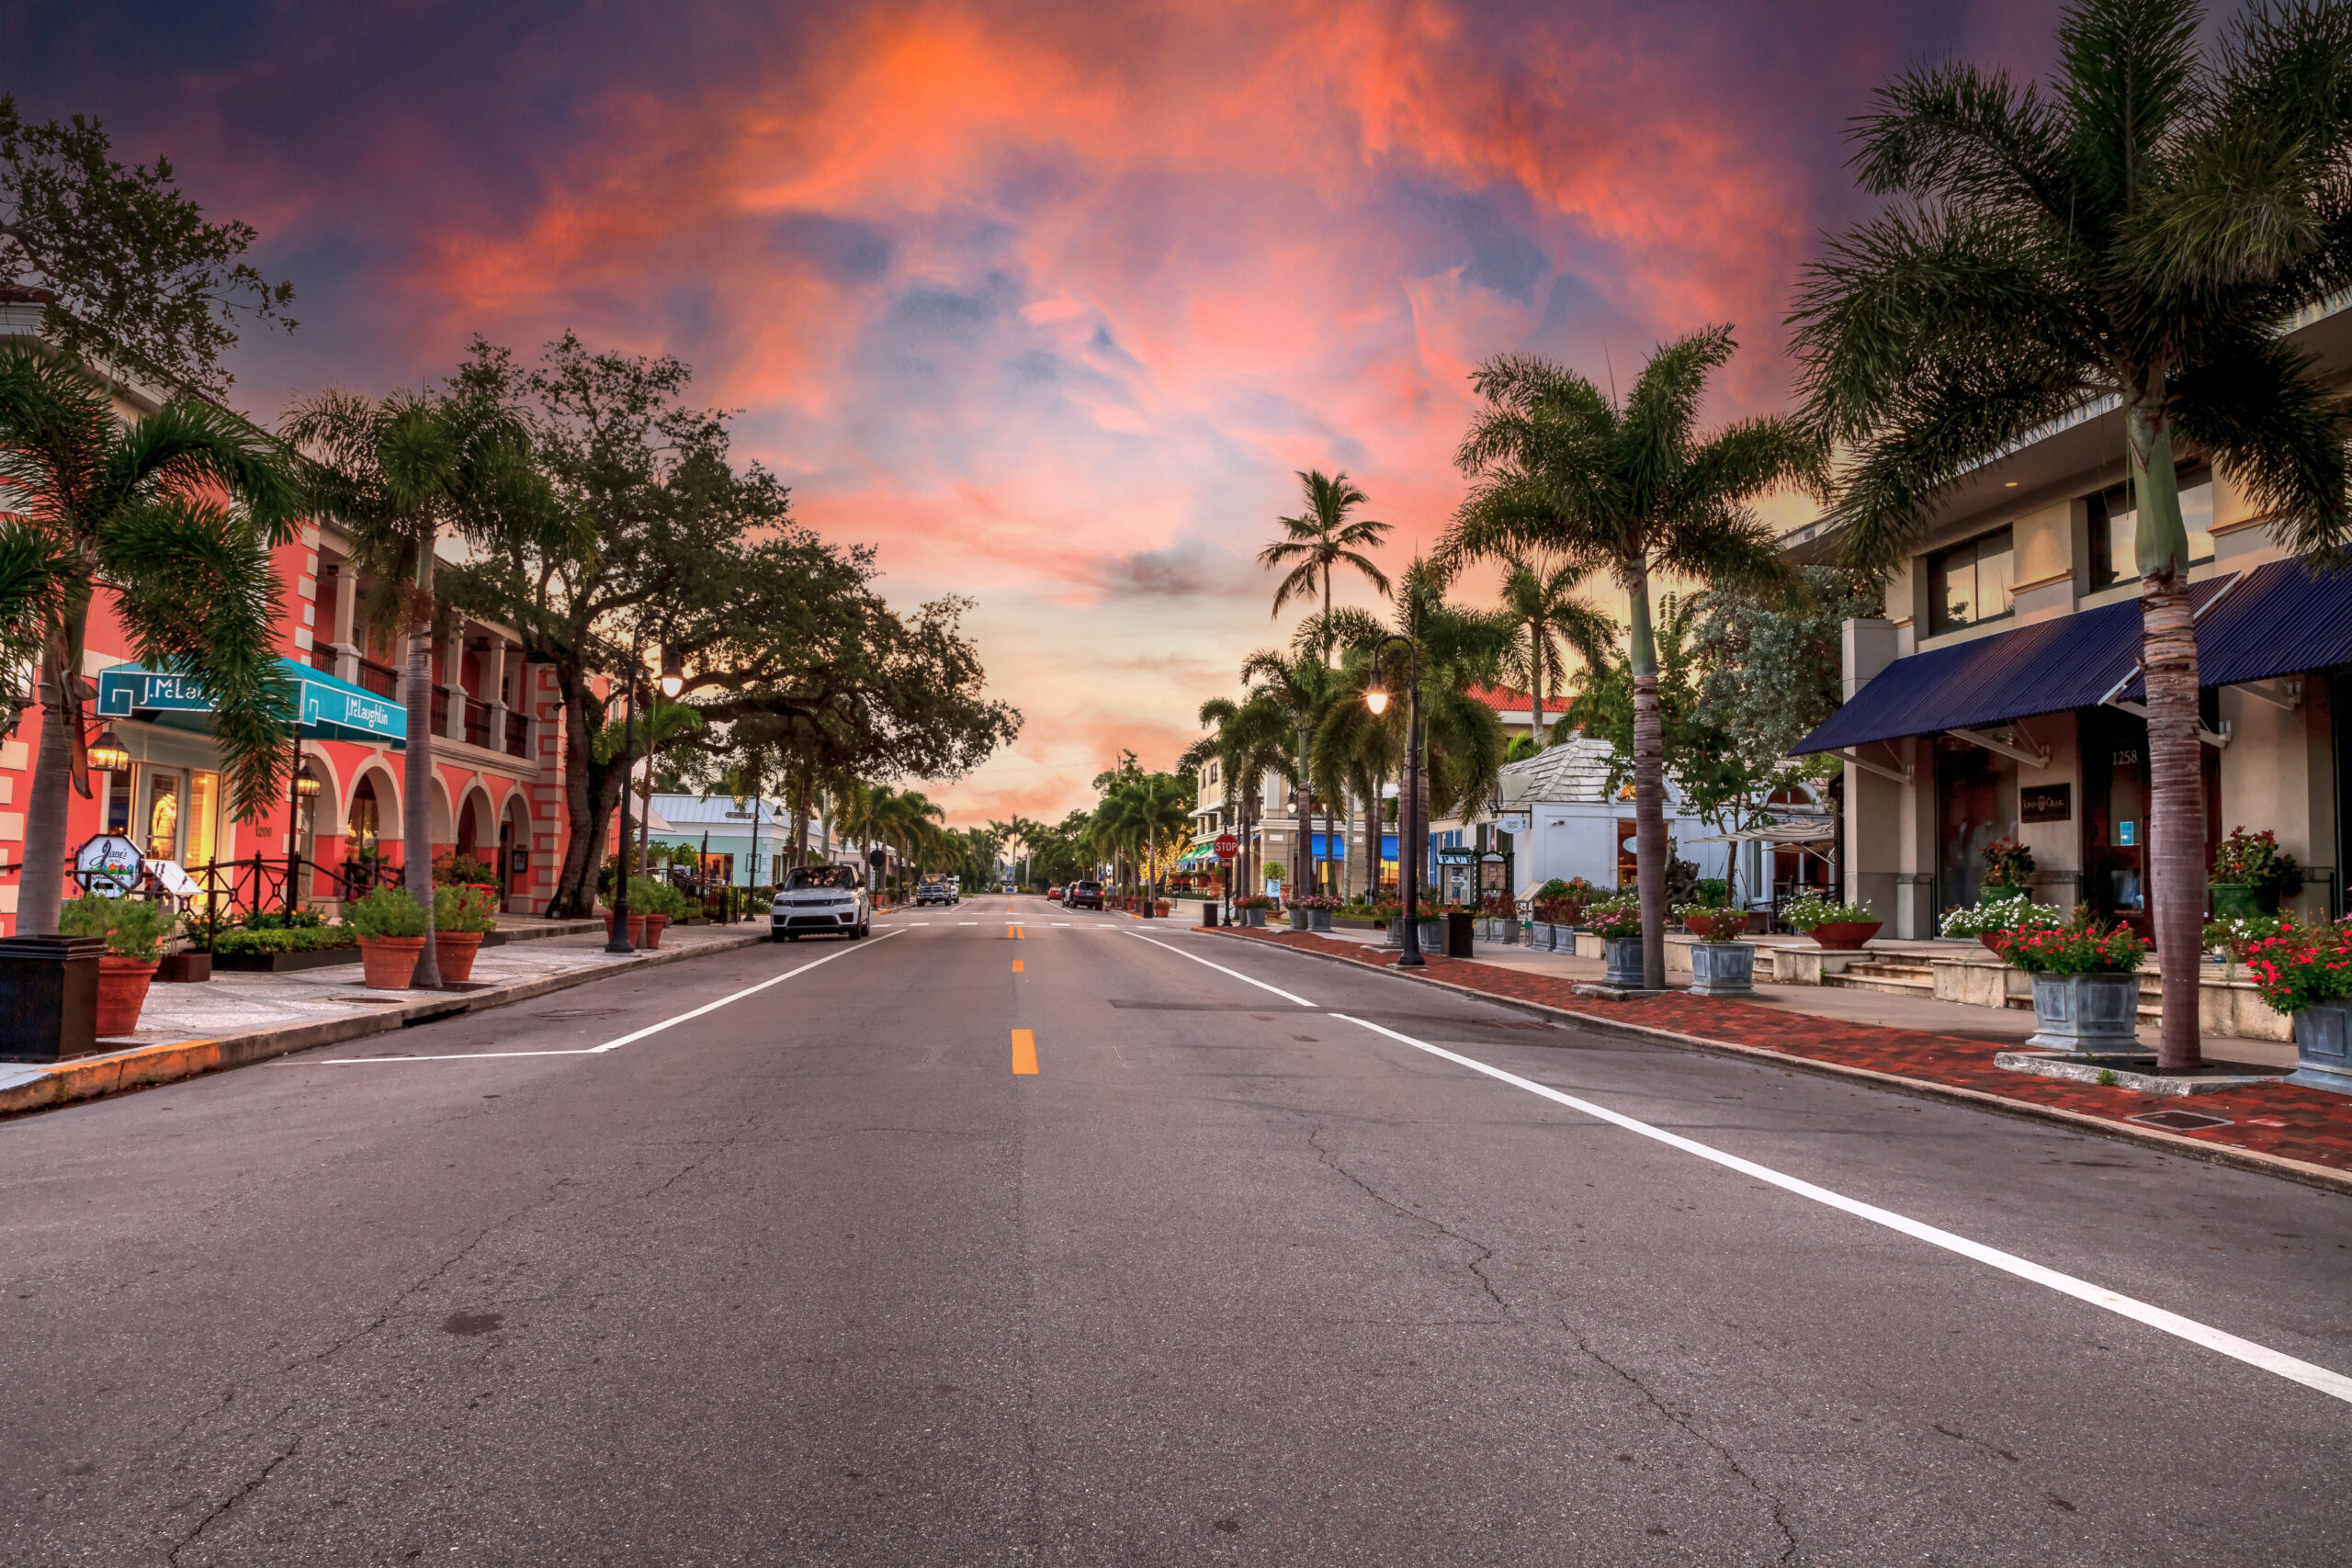 Naples Florida street view at sunset for places to stay in Southern Florida.